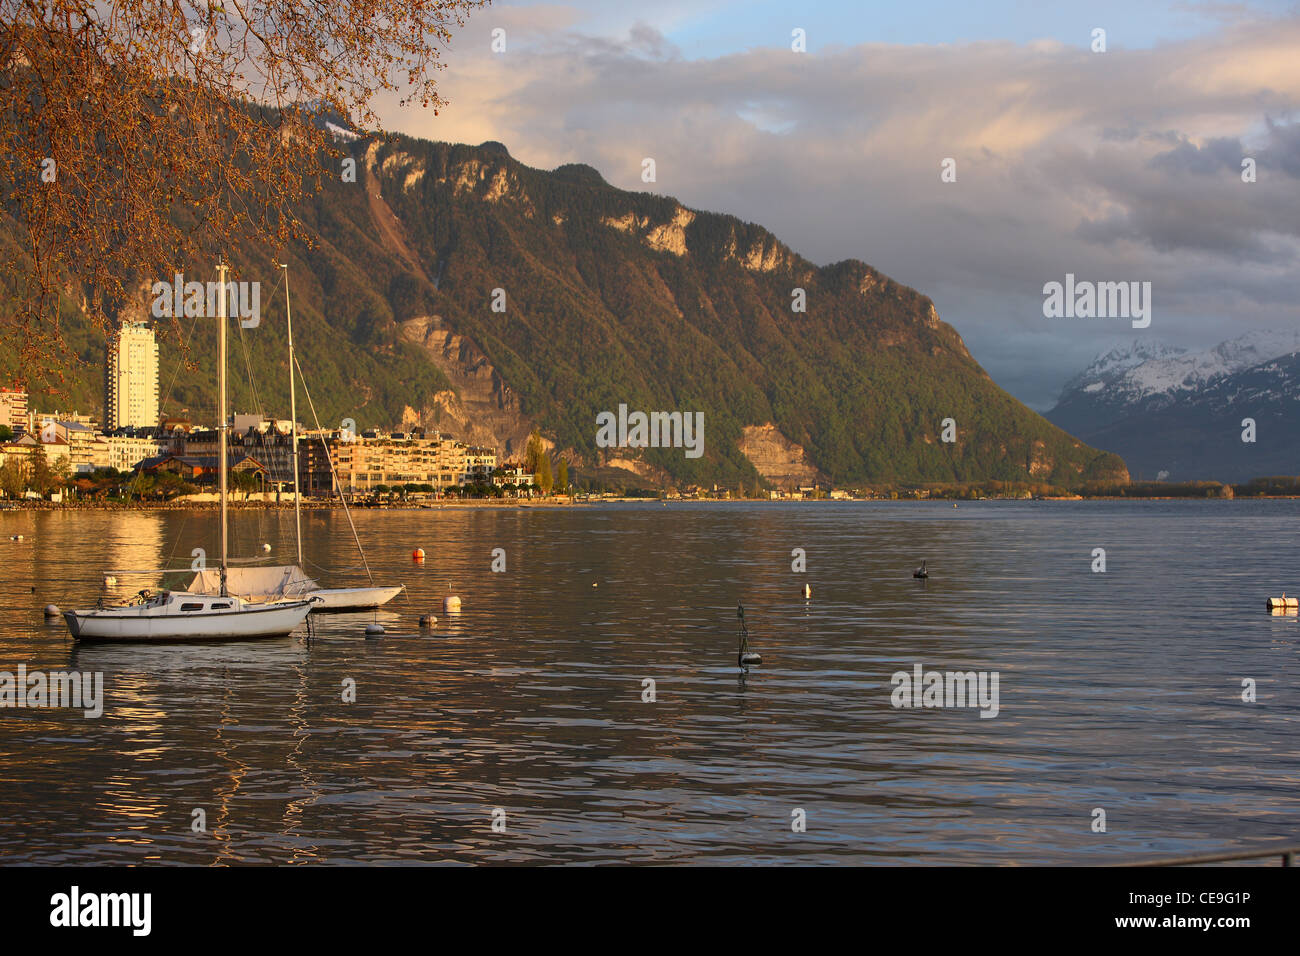 View of Lake Geneva in Montreux, Switzerland. Boats are on the water. Sunset in the Alps. Stock Photo